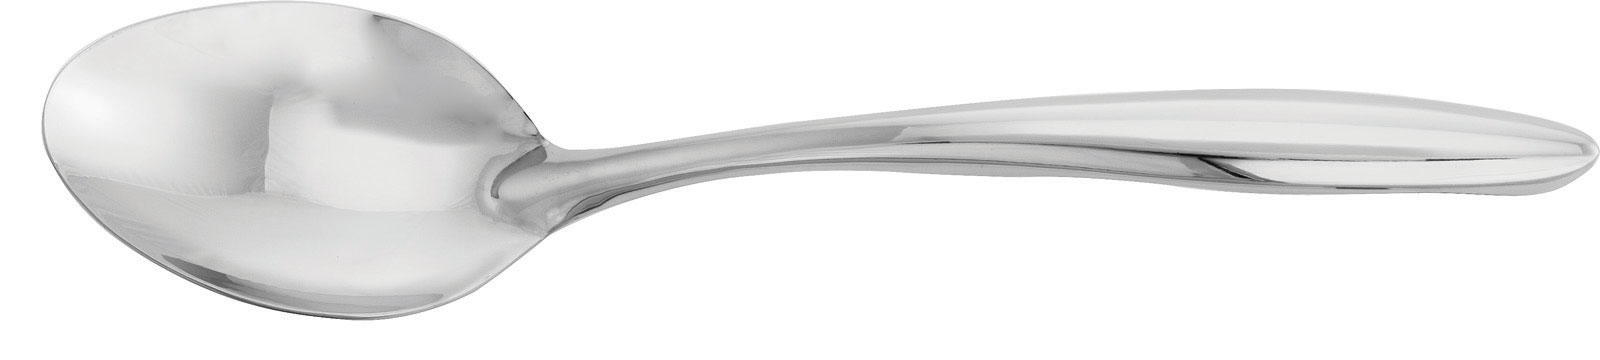 Walco Stainless ID012 Serving Spoon, Solid